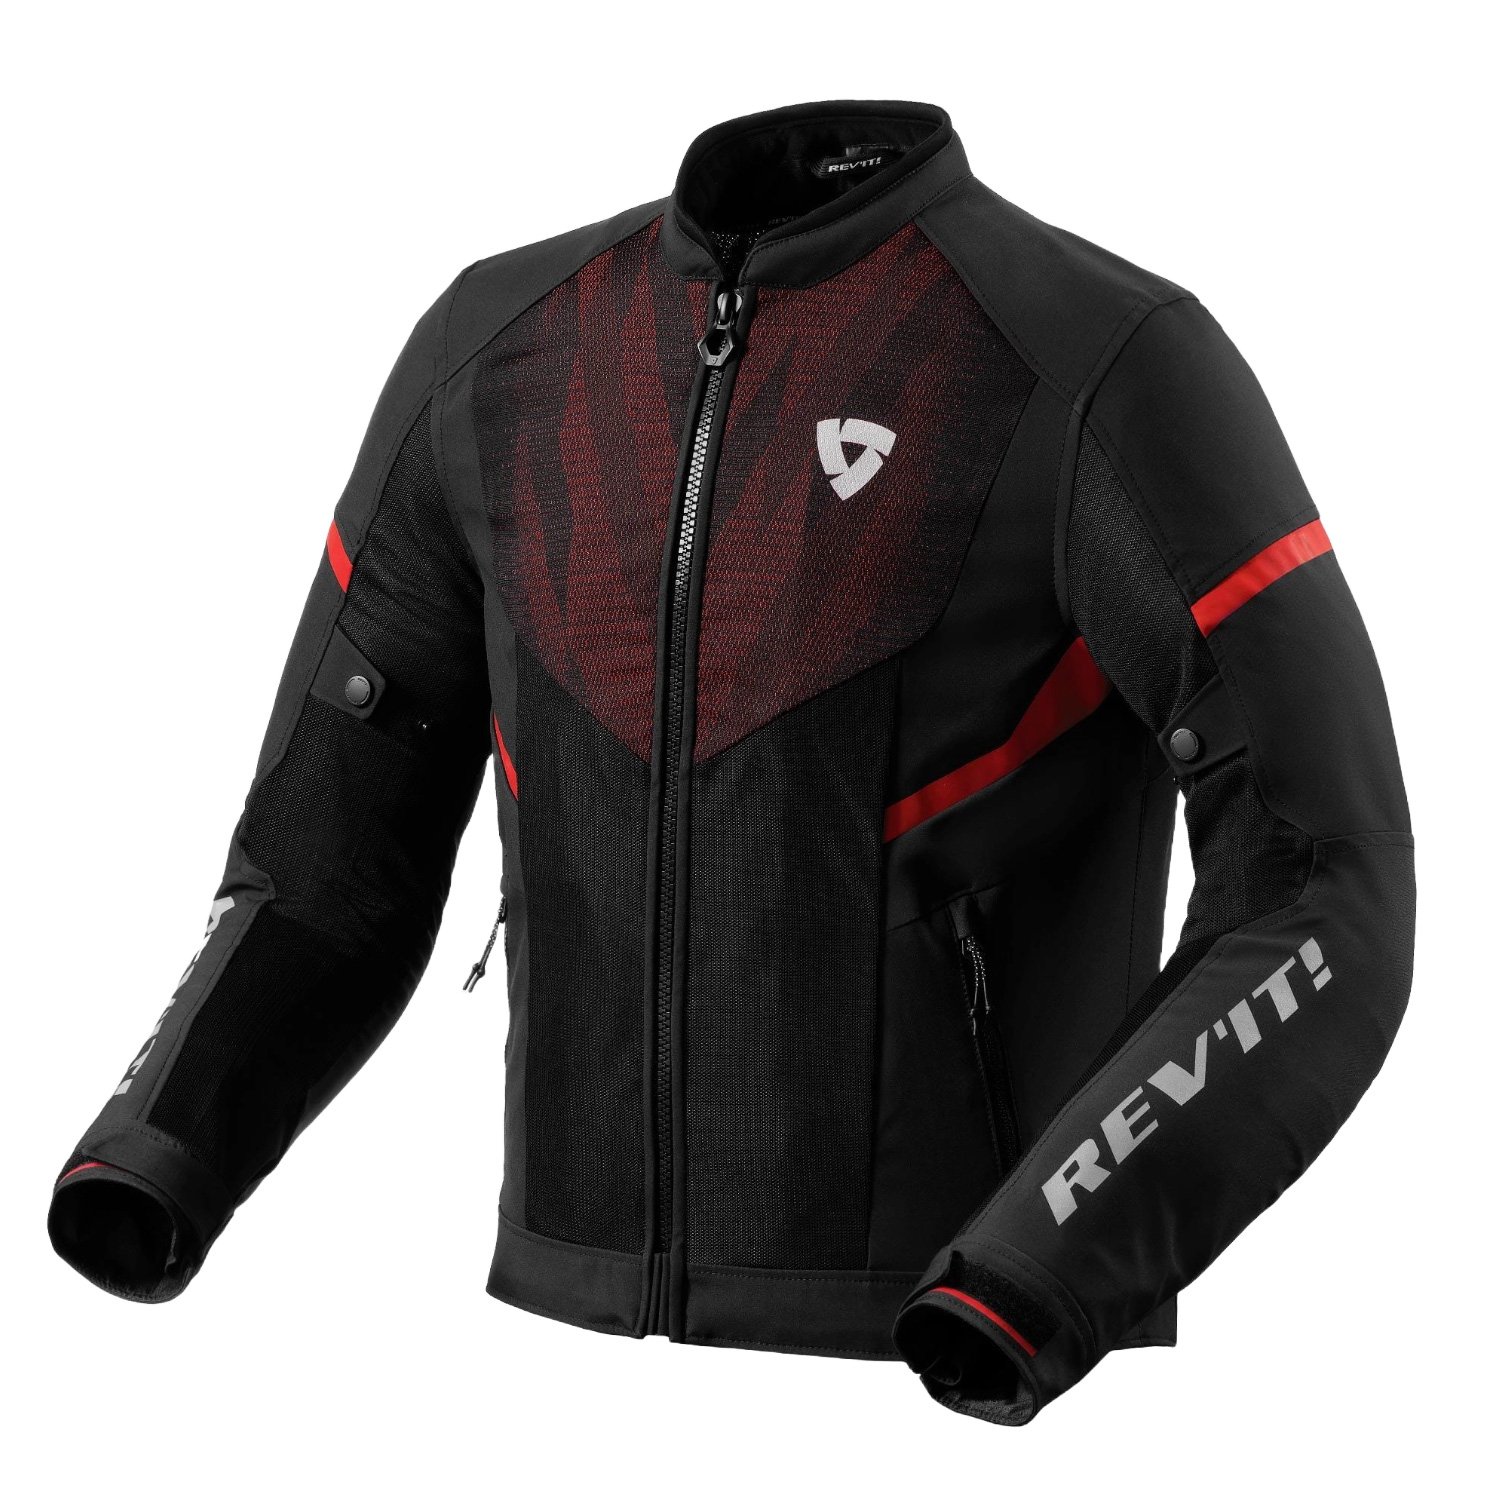 Image of REV'IT! Hyperspeed 2 GT Air Jacket Black Neon Red Talla 3XL